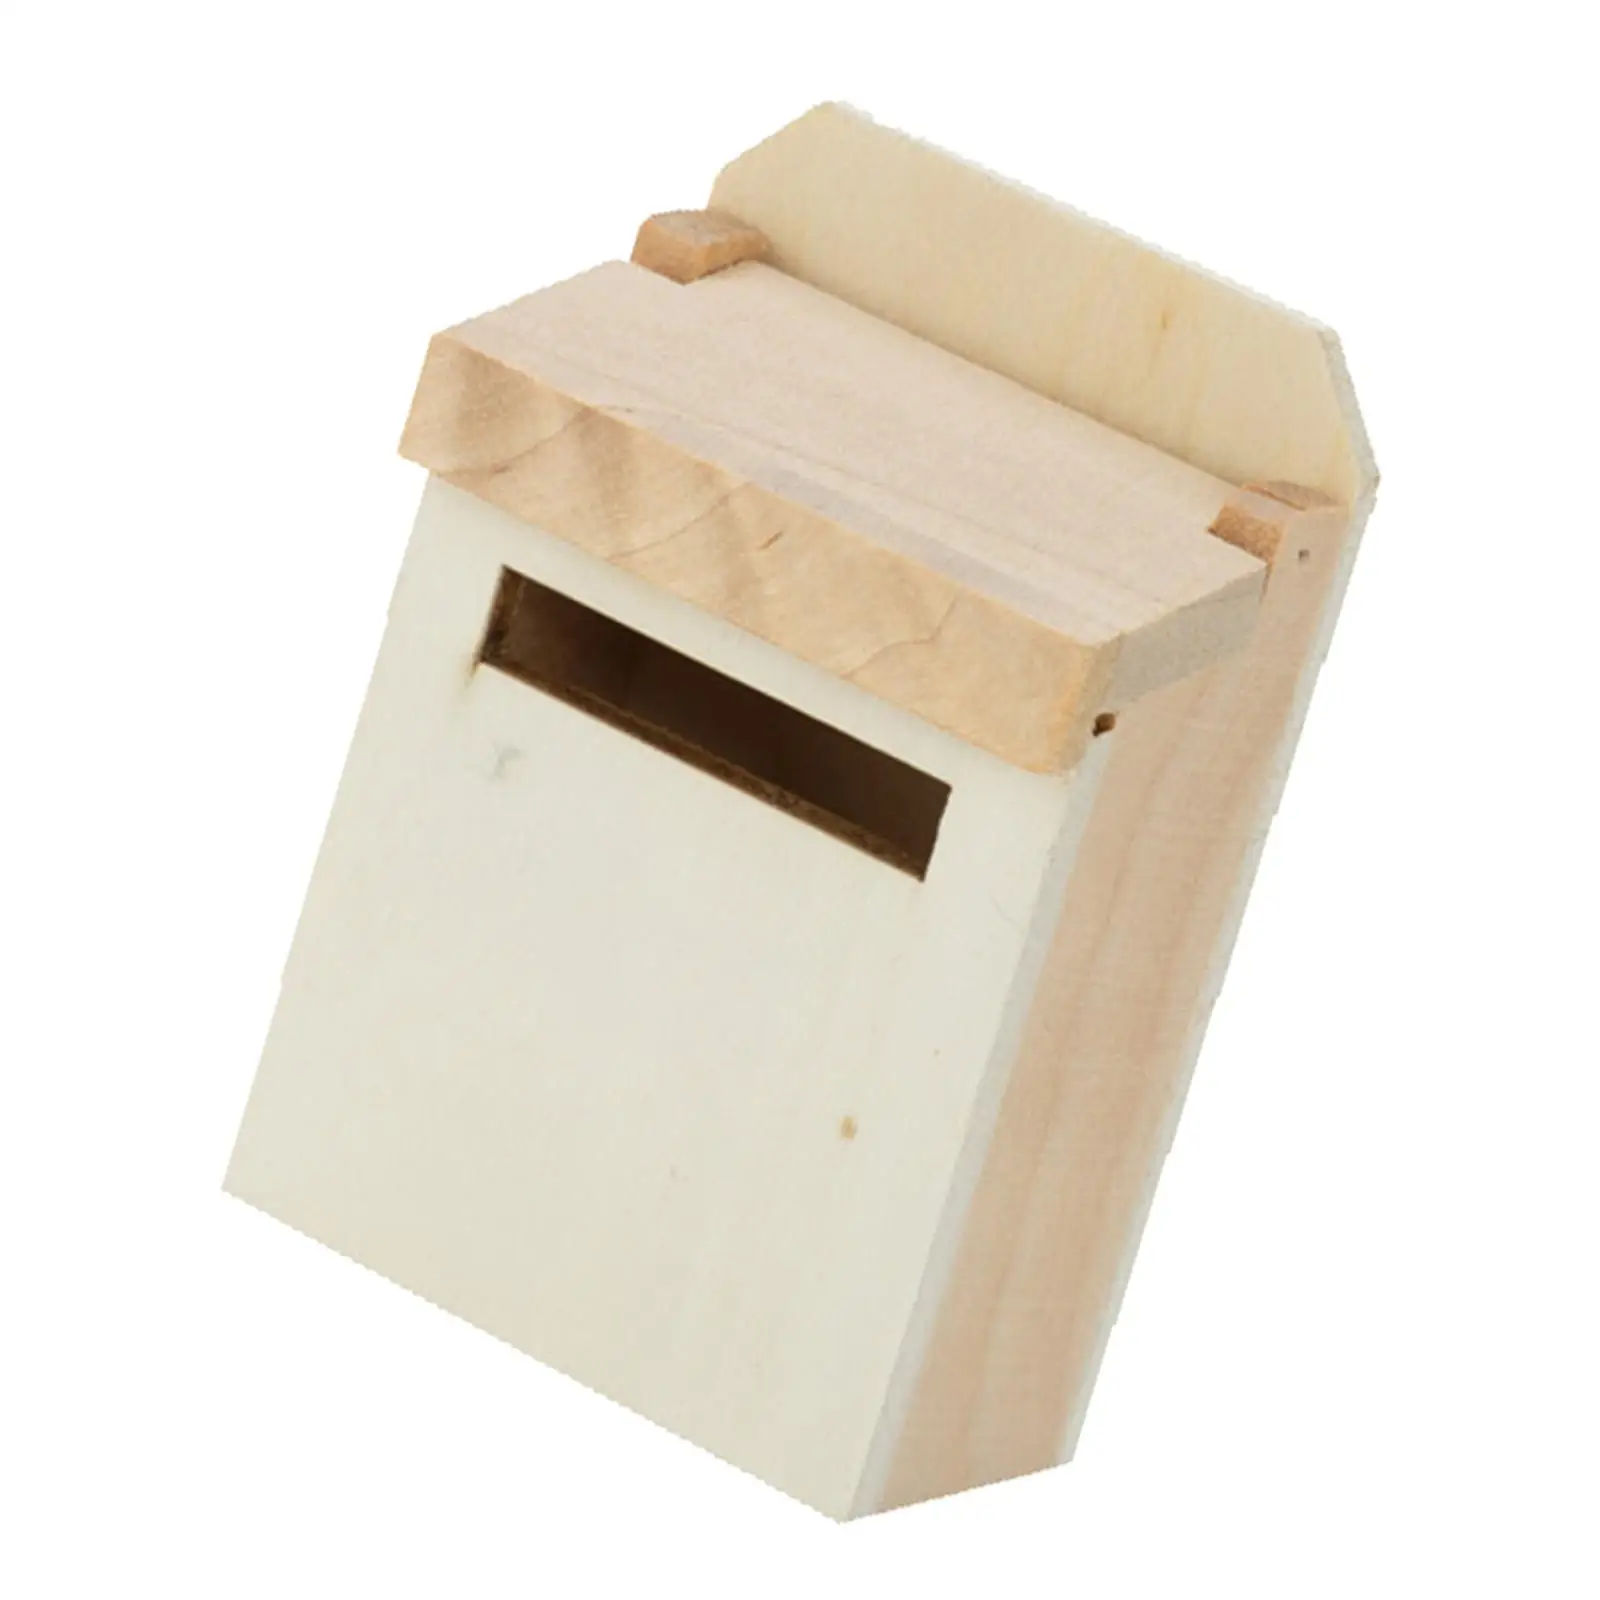 Wooden Mailbox Mail Box for 1:12 Dollhouse Playhouse Creative Toys Accessory